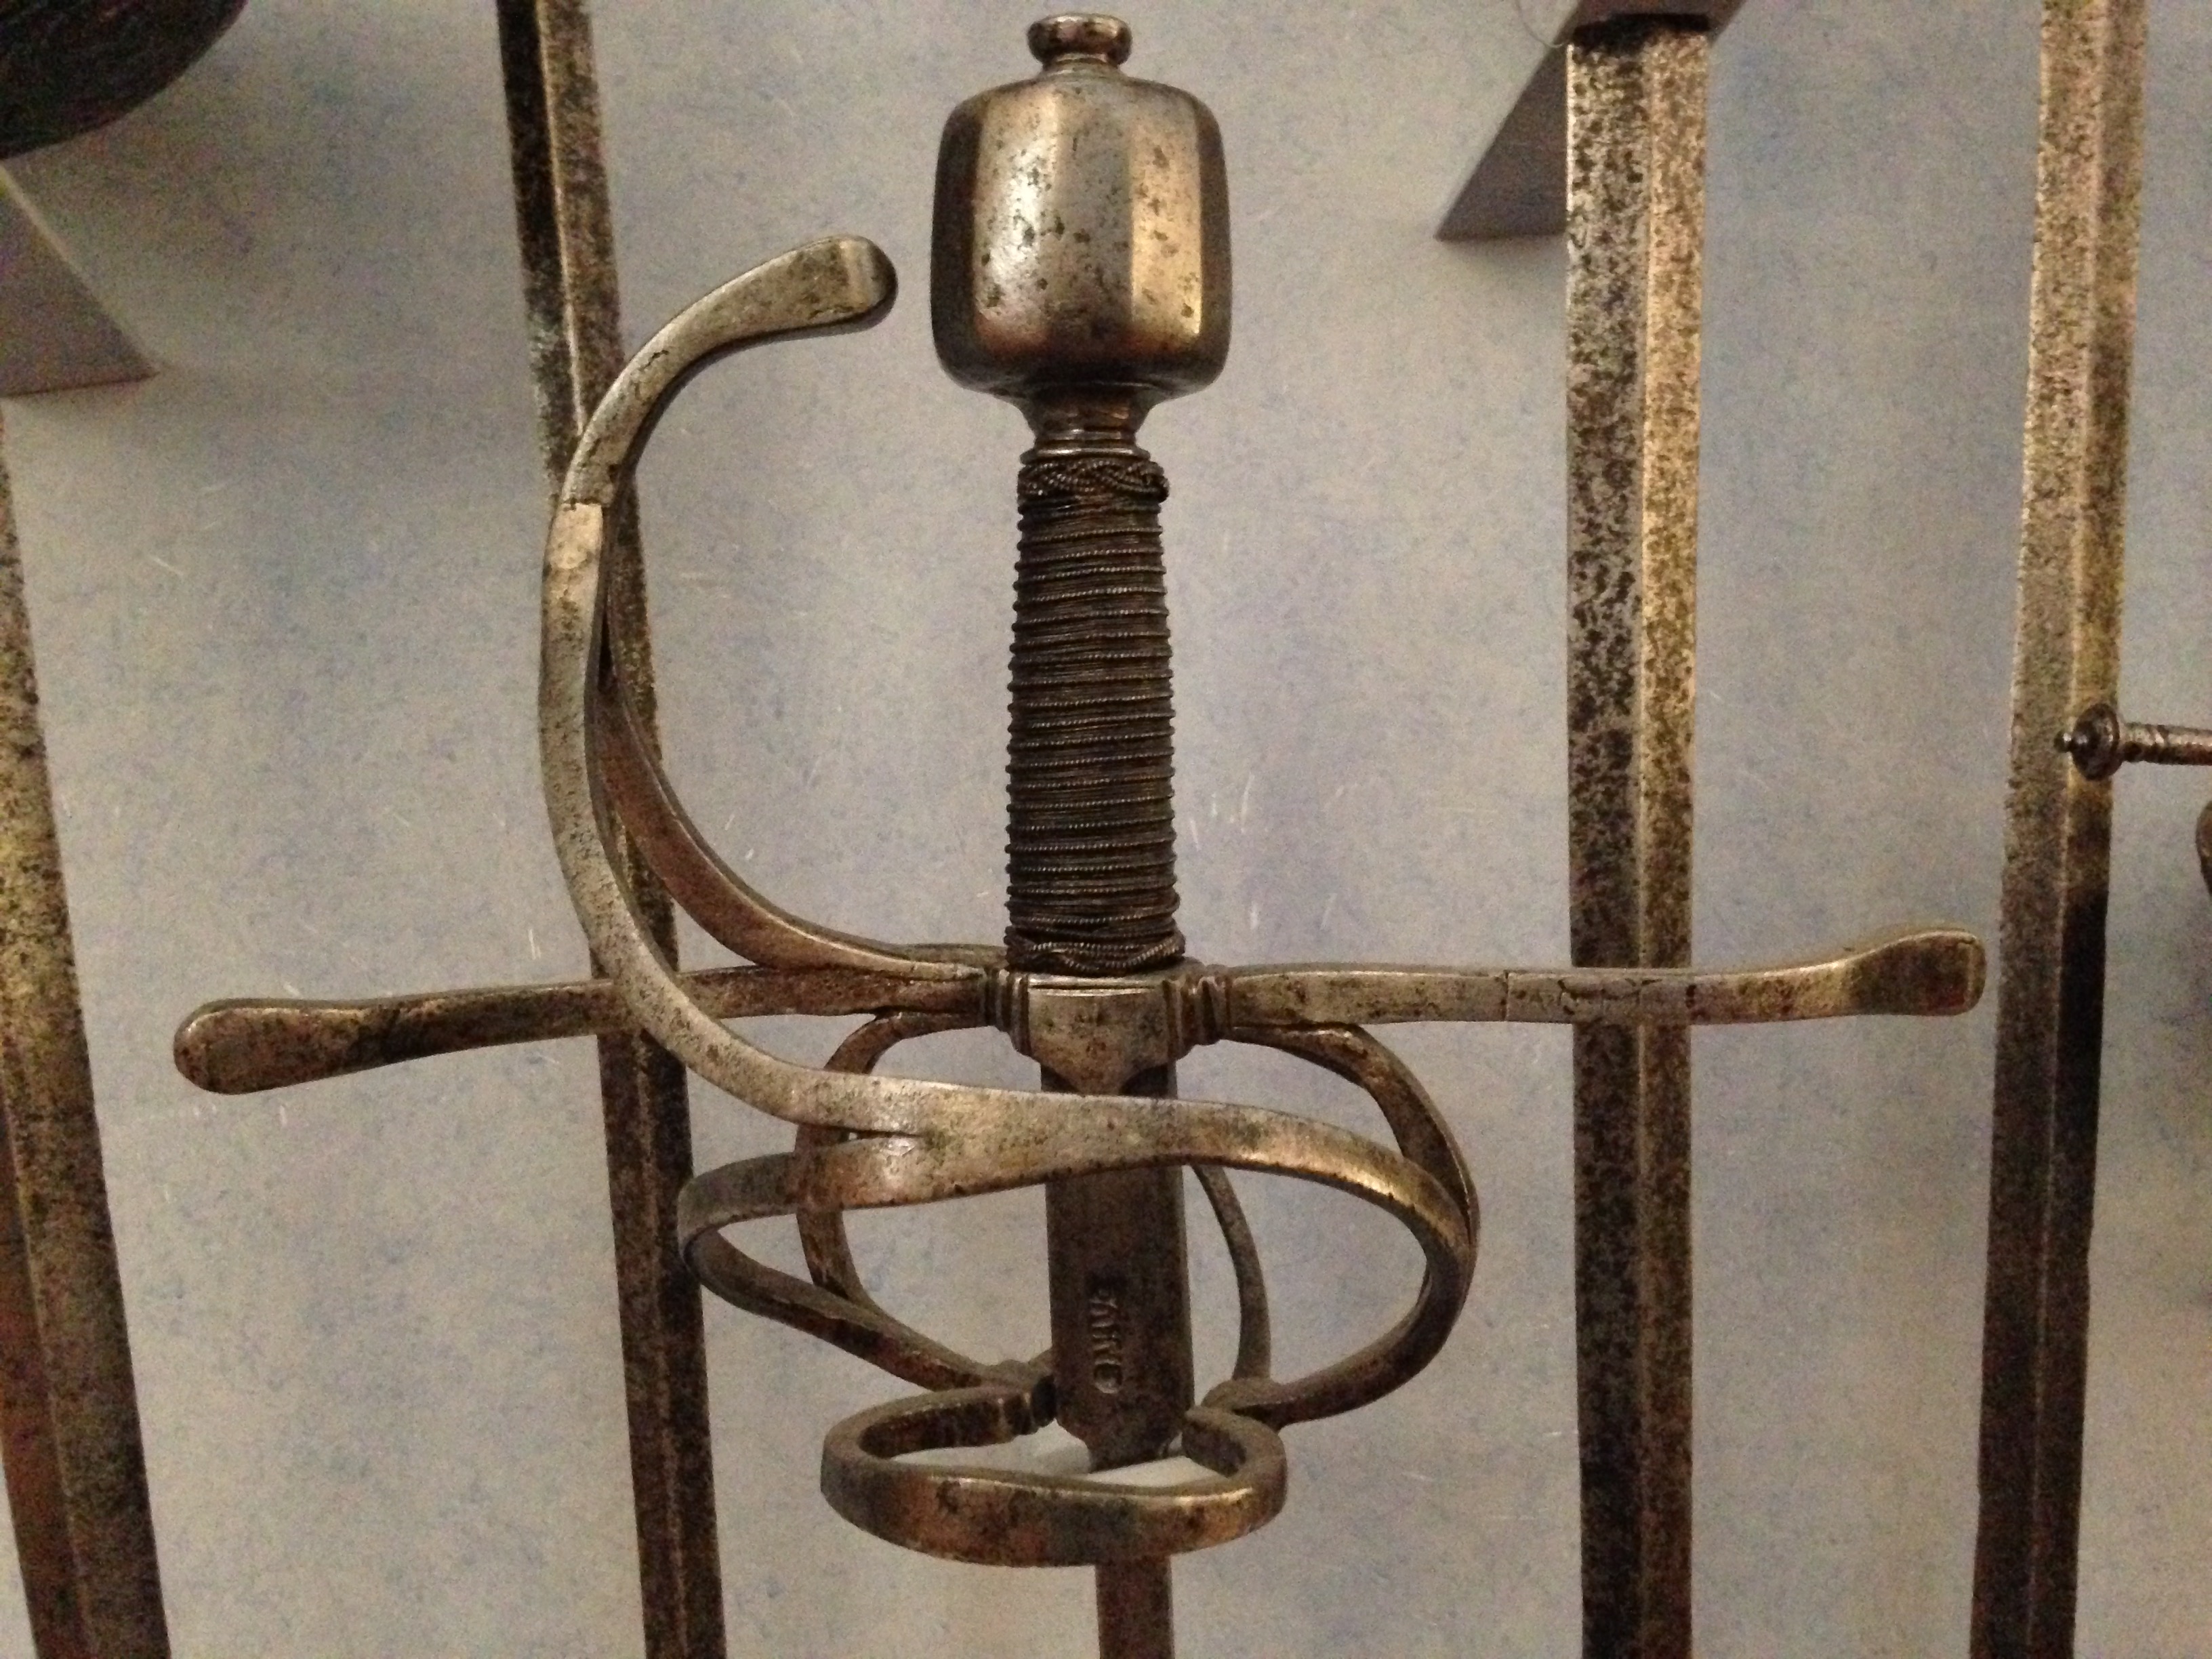 Fig. 1. Museo Bardini, Florence. Practice Rapier/spada da marra/fioretto, circa 1600. The swept hilt is typical of the actual rapier of the period. Note the width of the ricasso.